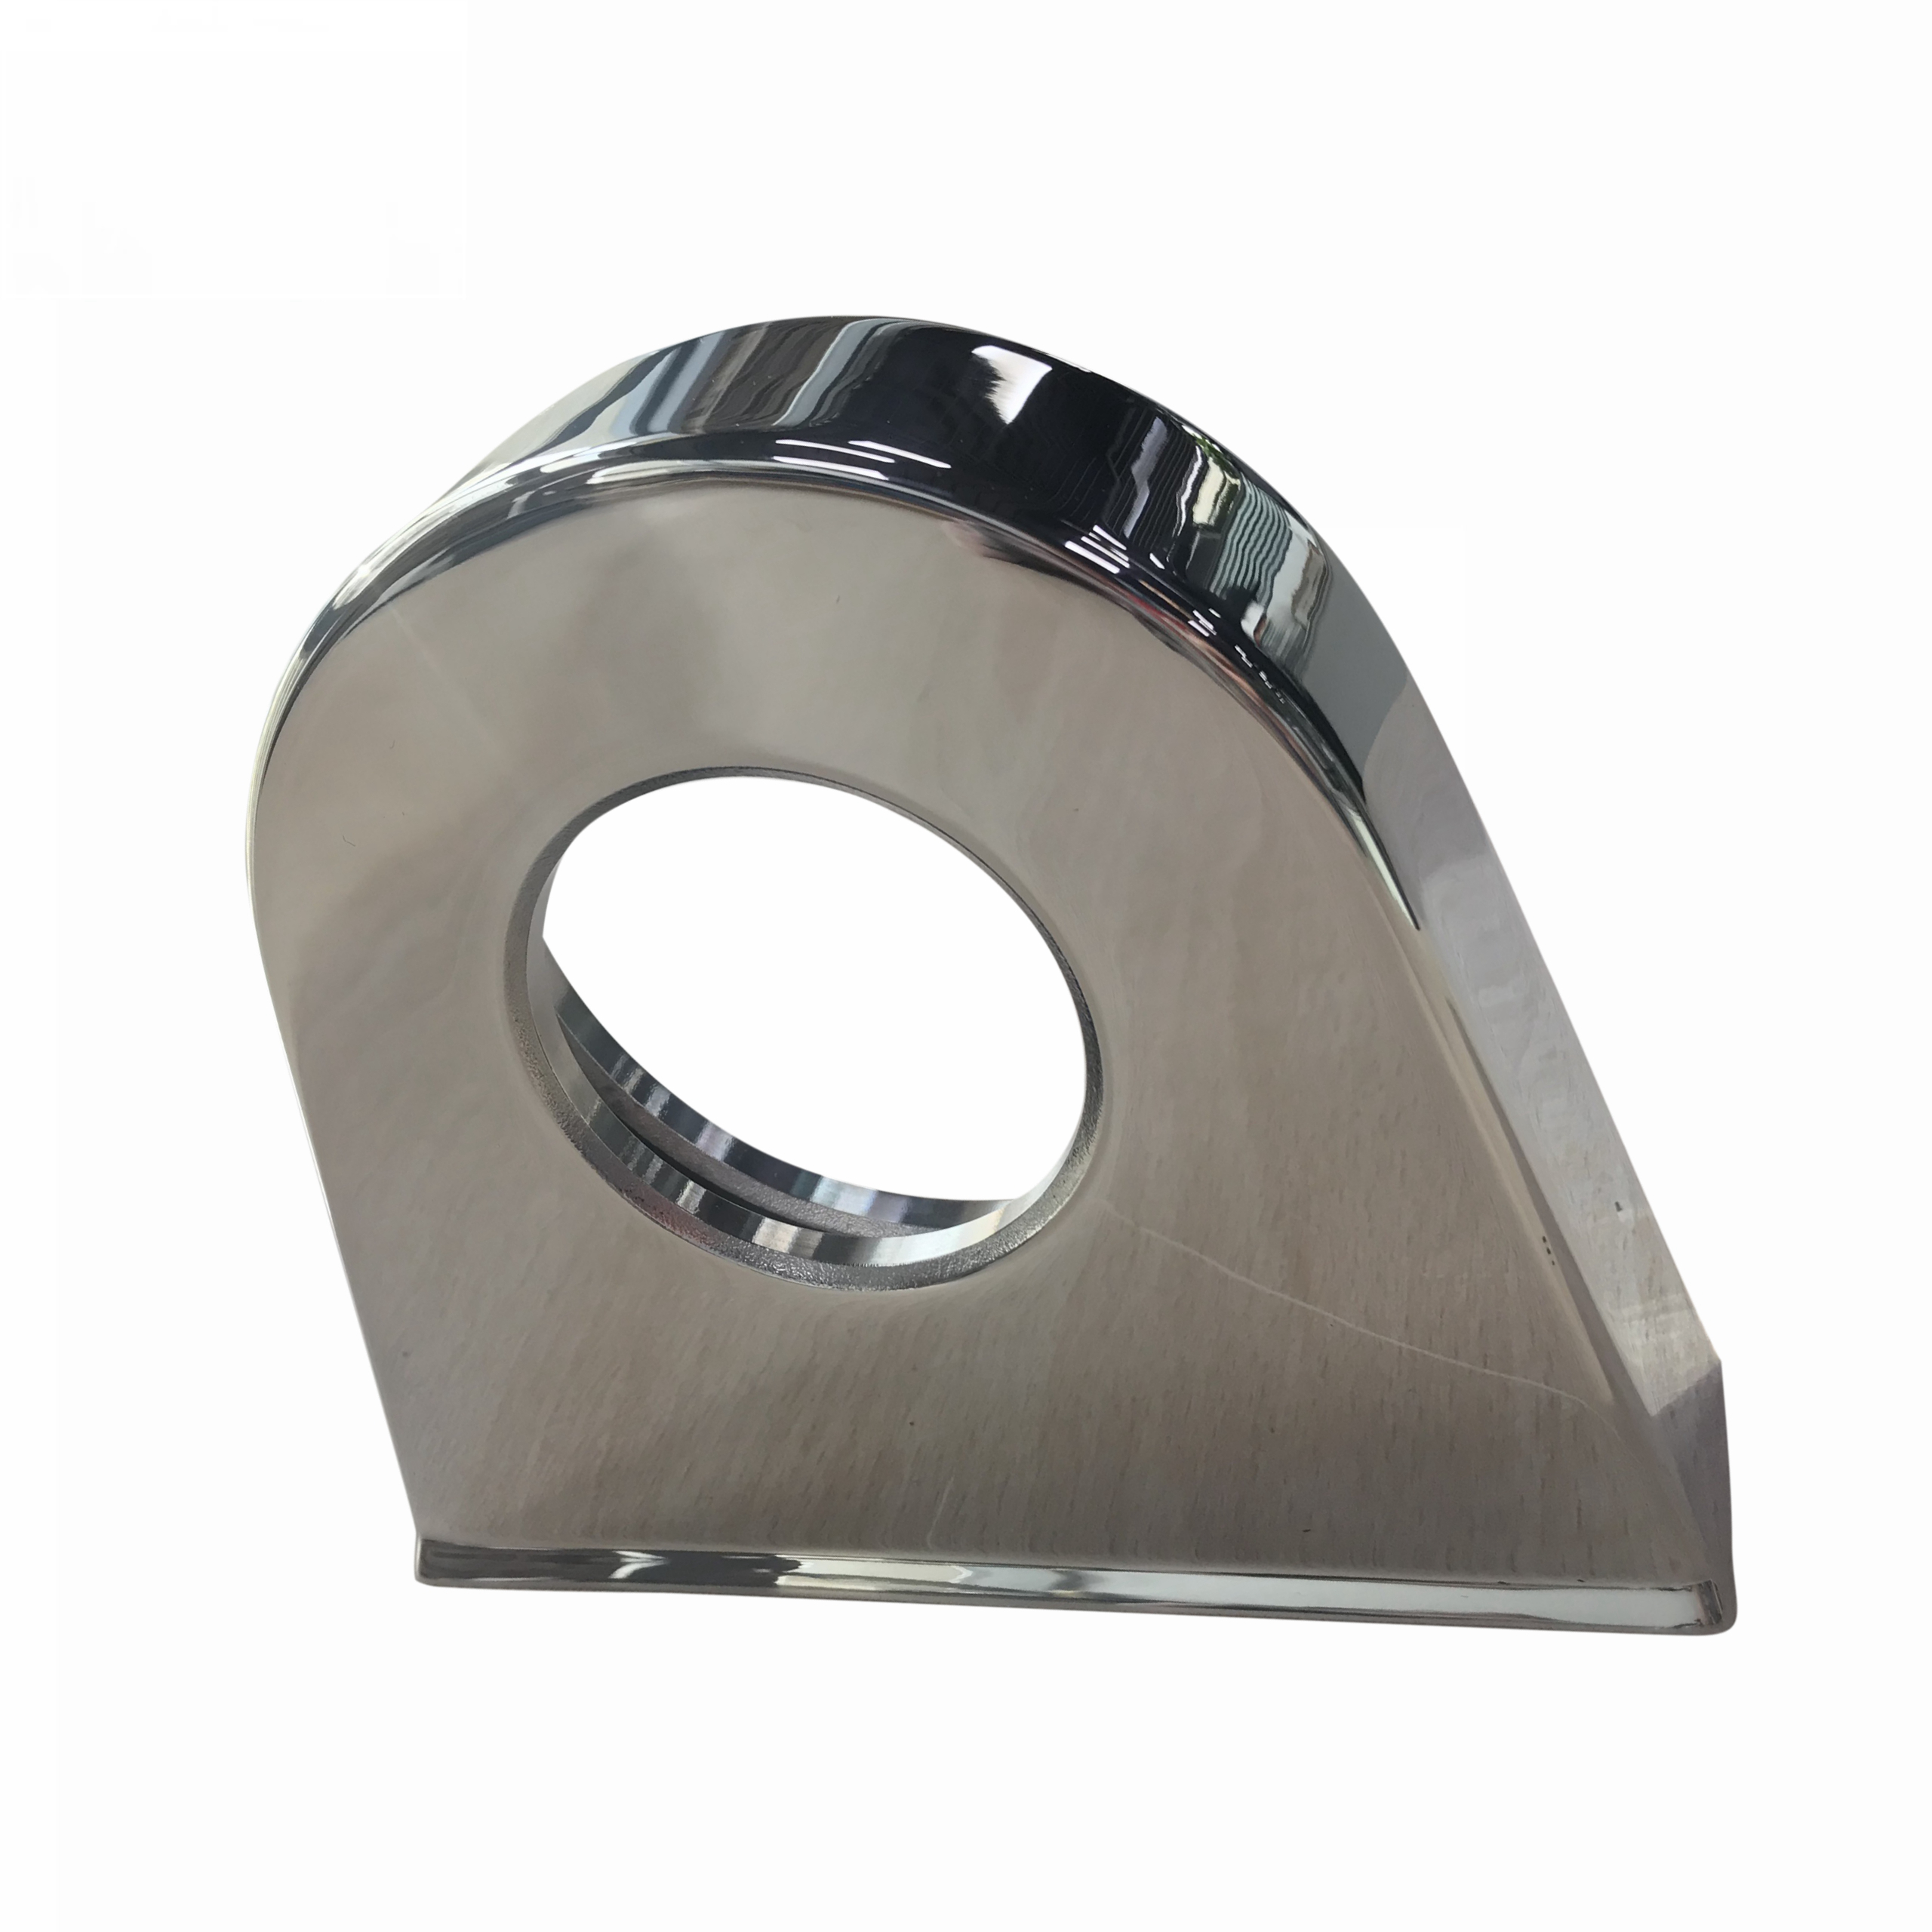 Custom 2205 duplex stainless steel lost wax casting with chrome plating cover